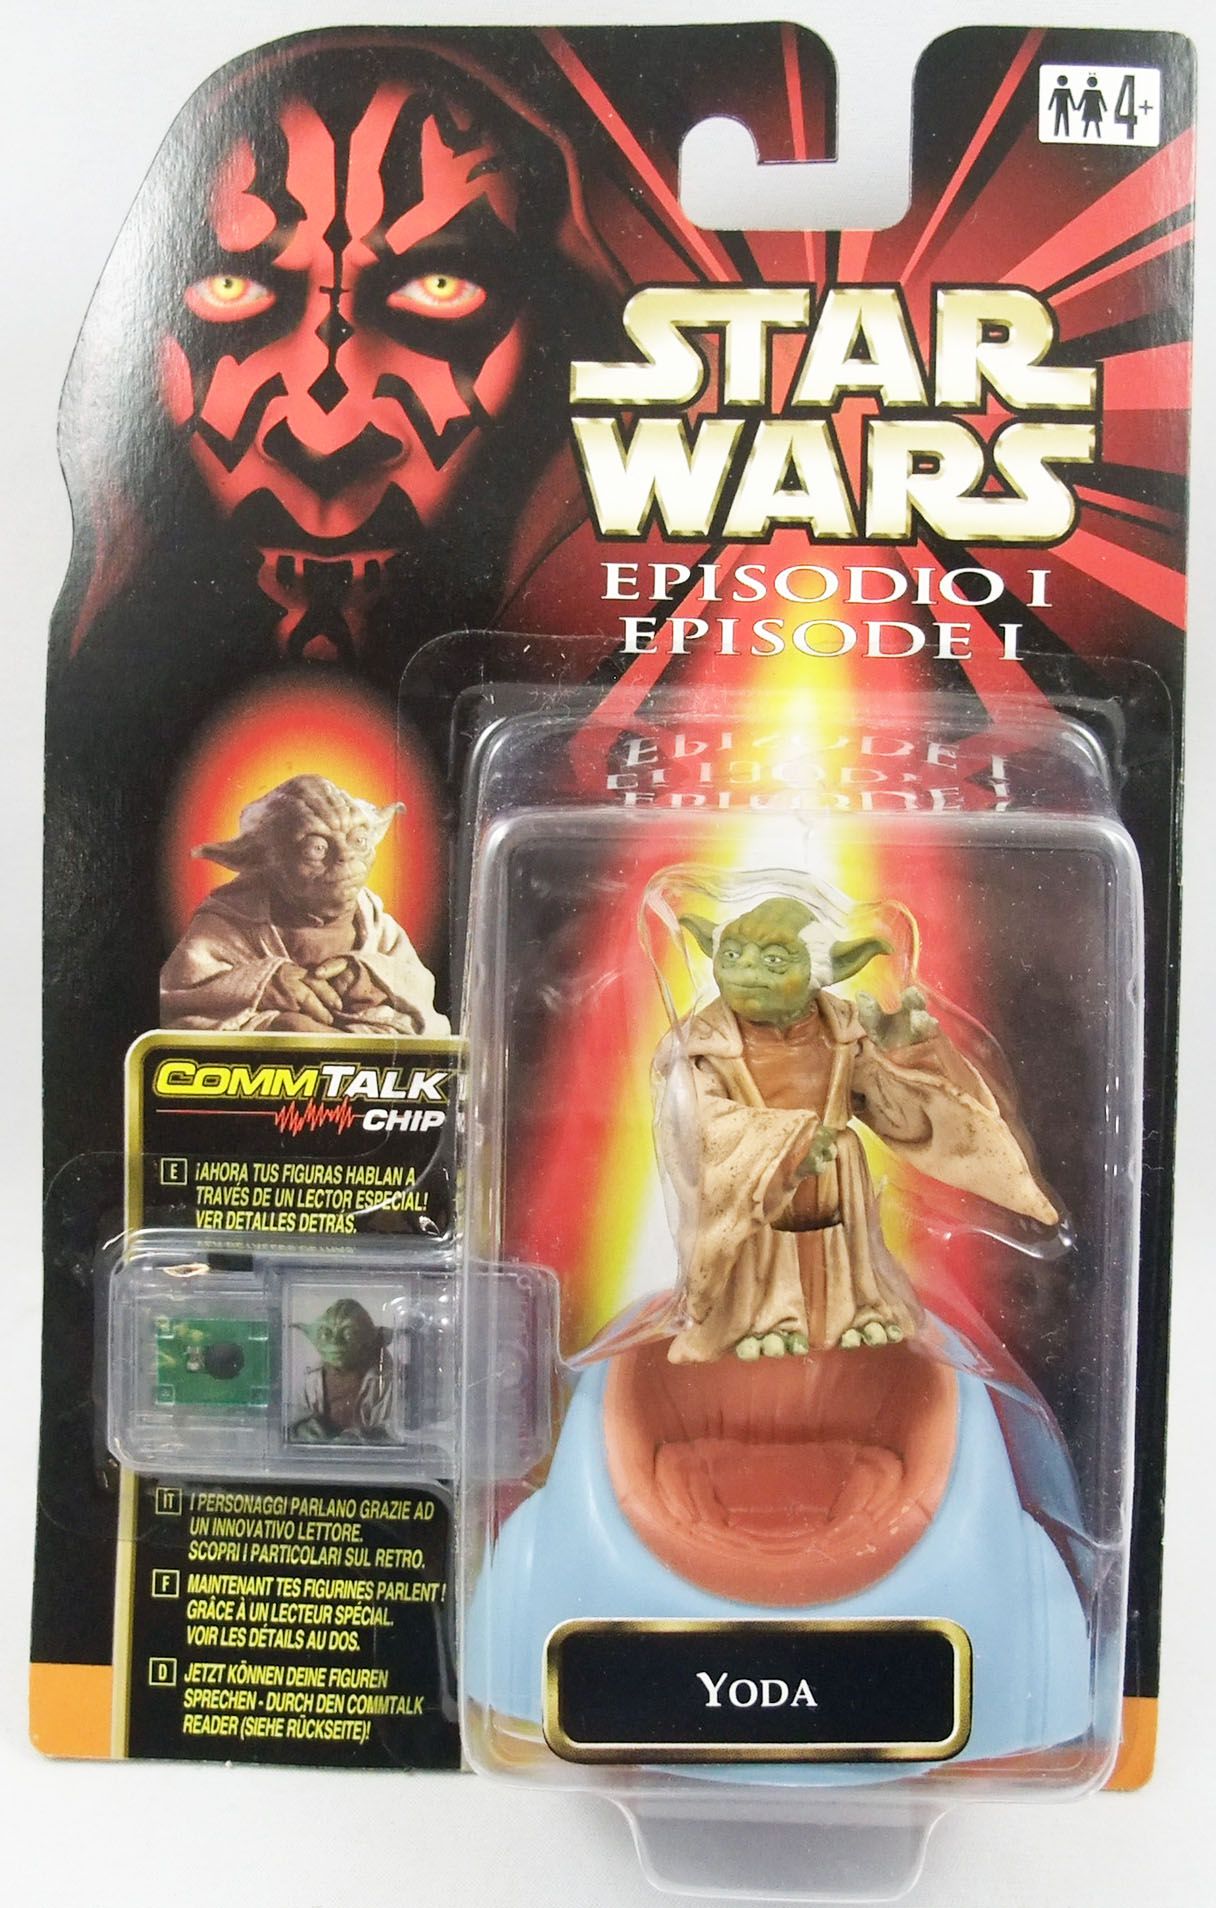 Details about   Star Wars Commtech Chip Figure Stand for Yoda Episode 1 EP1 1999 